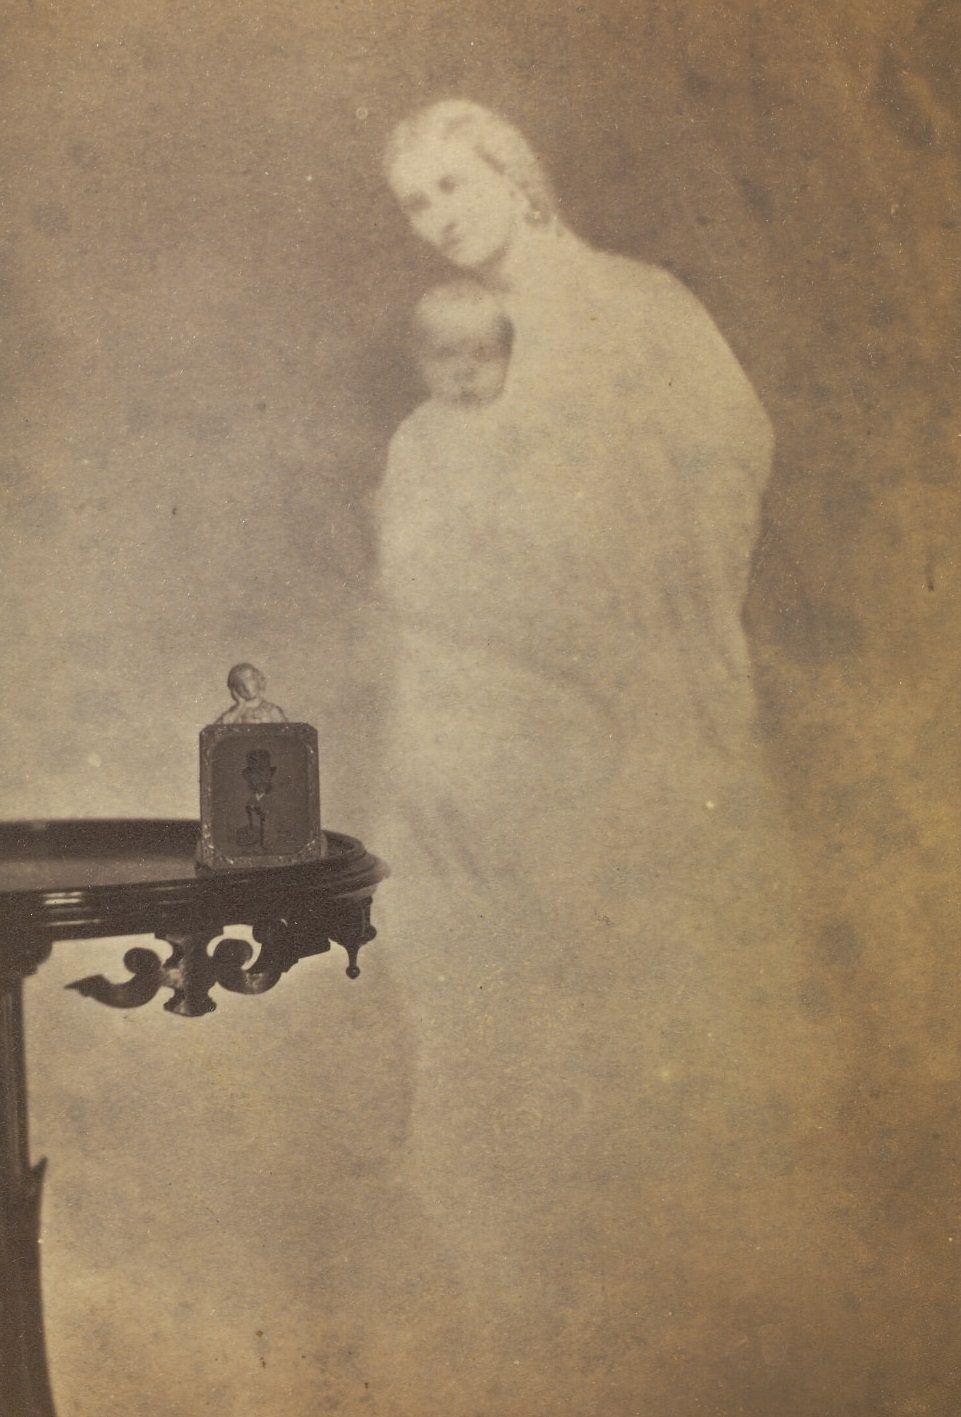 Photograph of a statuette and drawing on a side table, with a faint image of a woman and baby in the background.